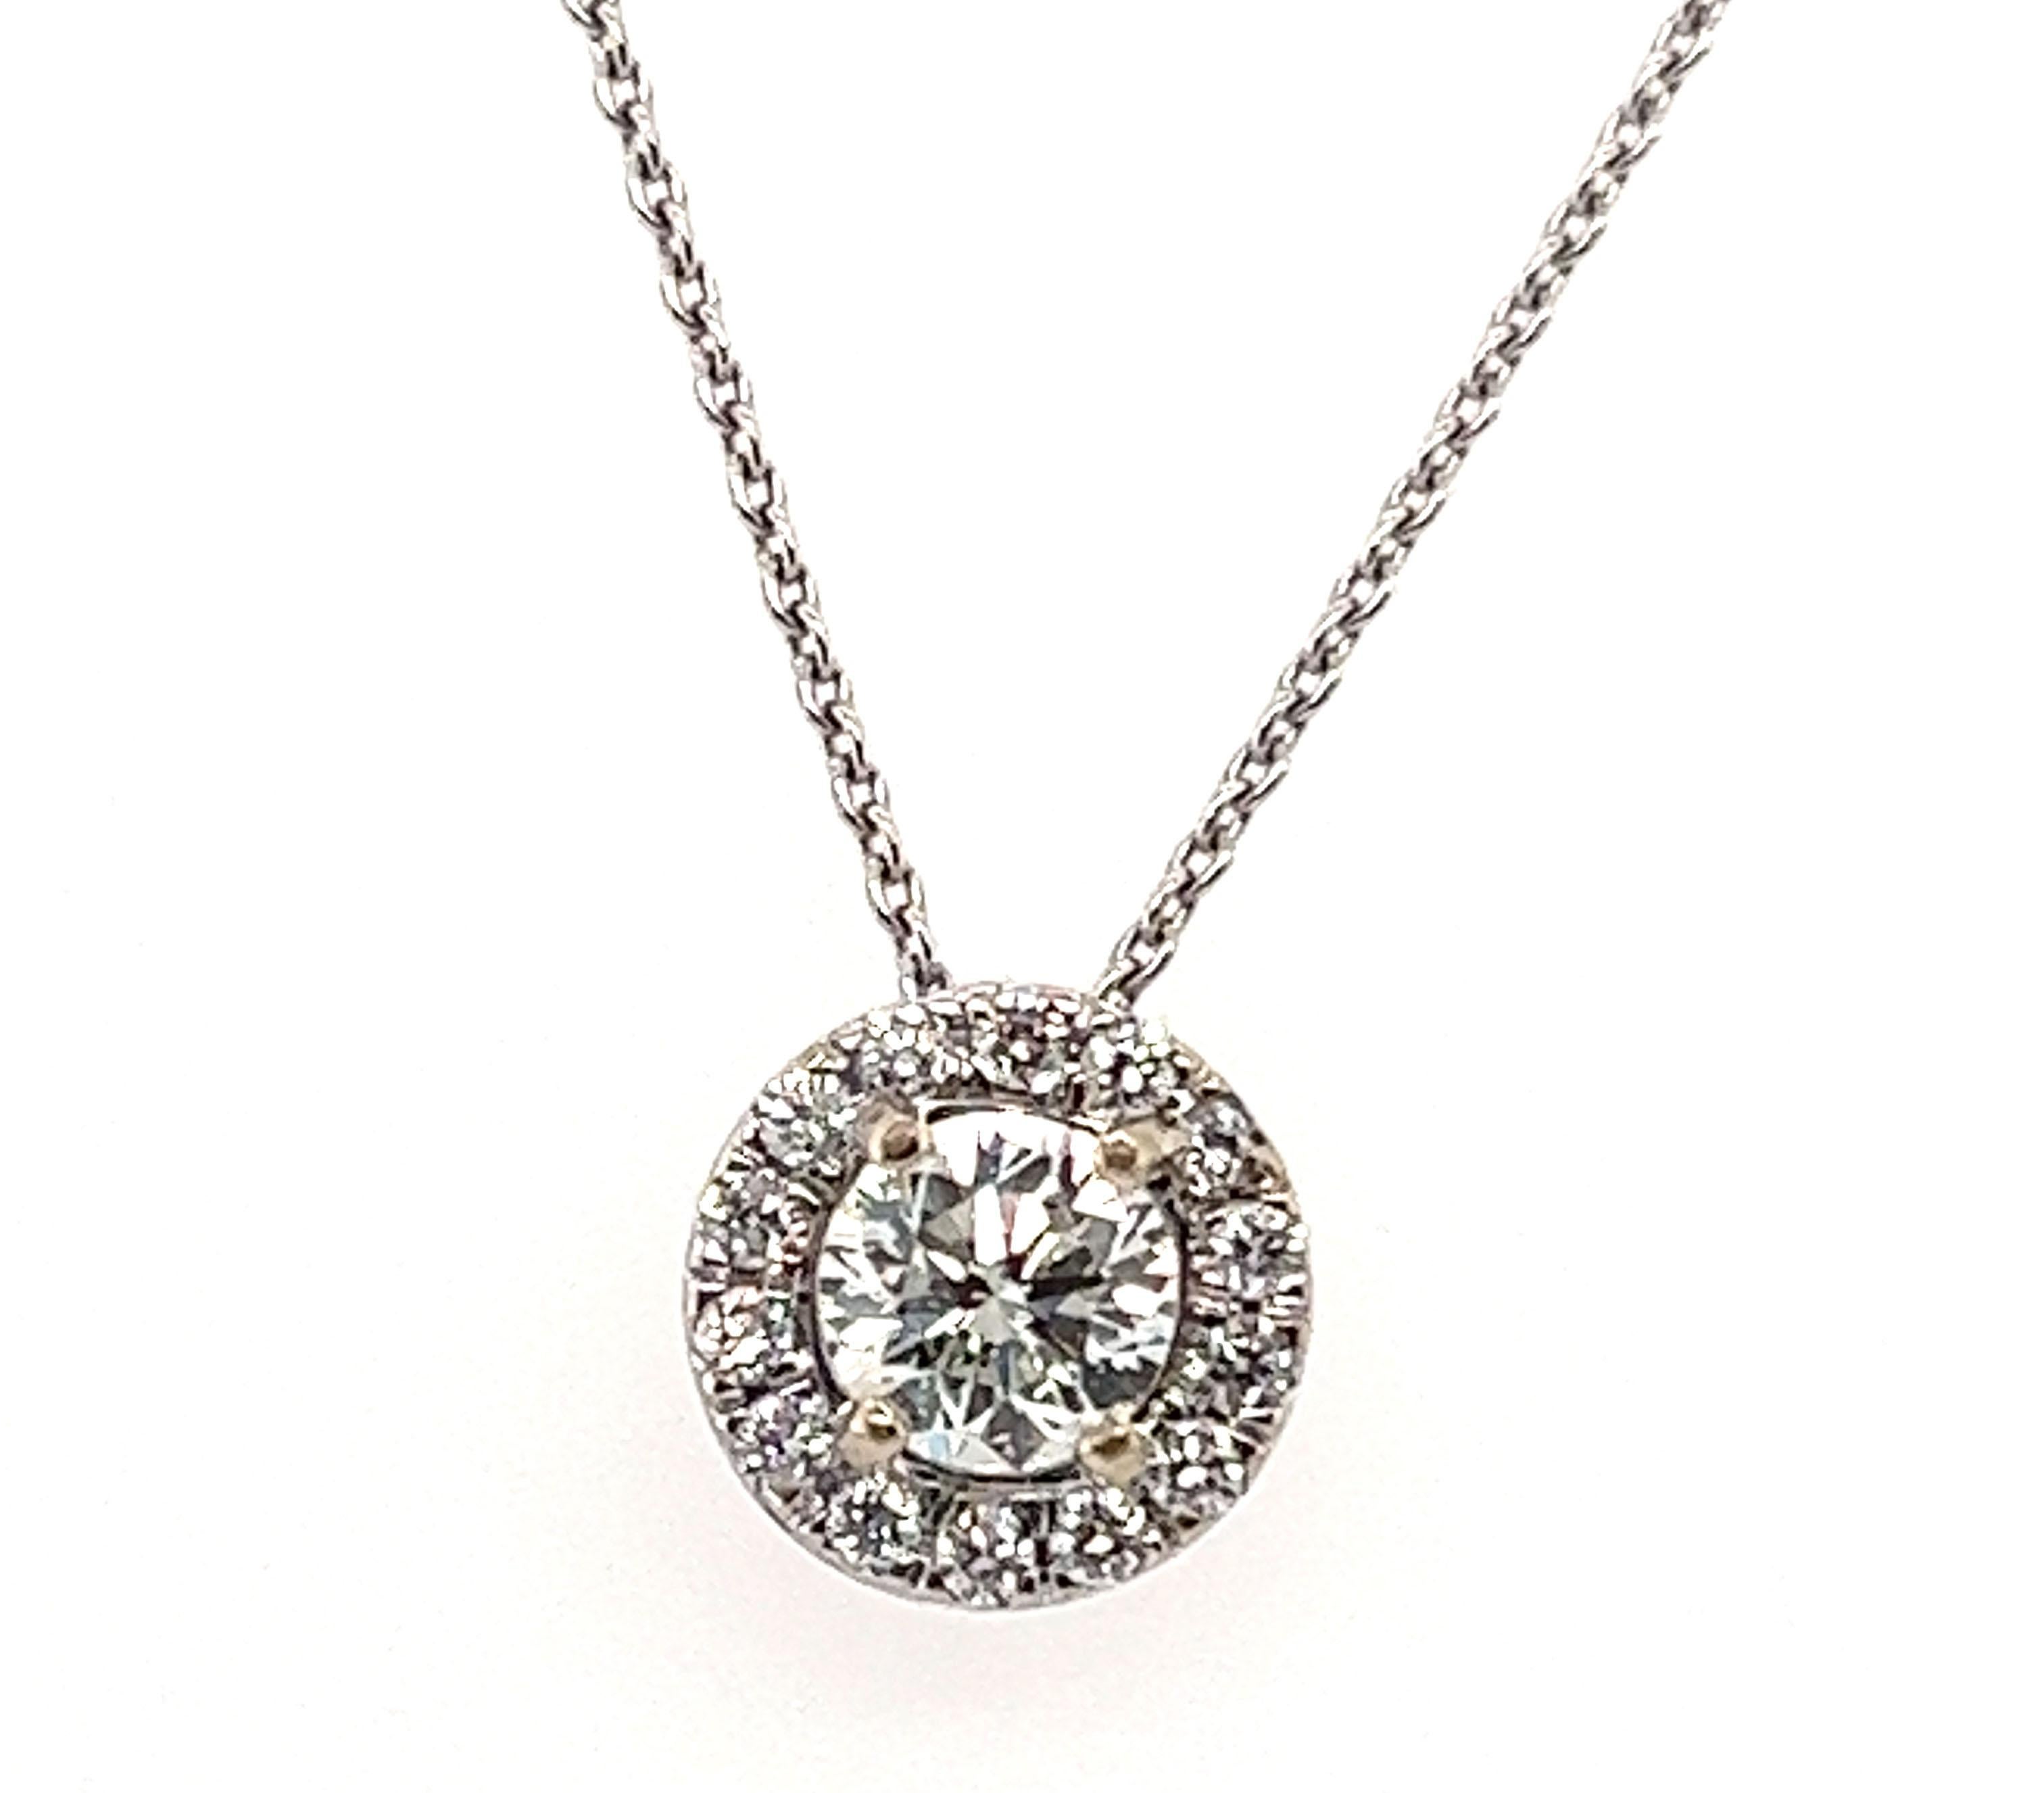 Diamond Halo Pendant .63ct Round Brilliant GIA 14K Brand New


Featuring a Genuine .48ct Natural Round Brilliant Cut GIA Certified Center Diamond

Gorgeous Round Brilliant Diamond Encompassed by a Glittering Halo of Diamonds 

Exquisitely Made in